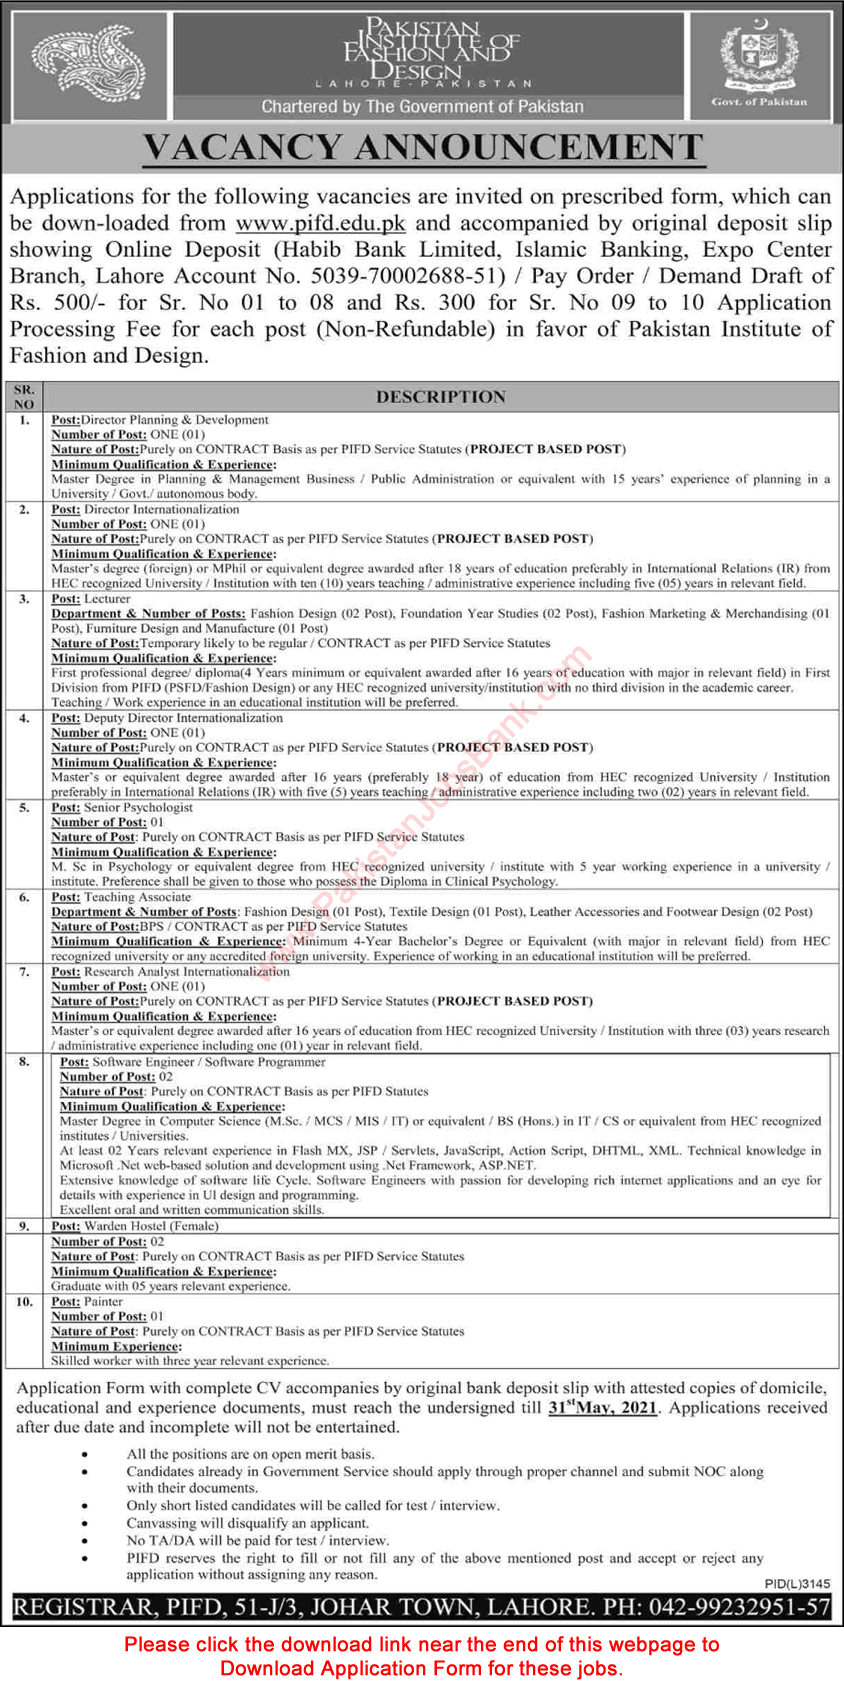 Pakistan Institute of Fashion and Design Lahore Jobs May 2021 PIFD Application Form Latest